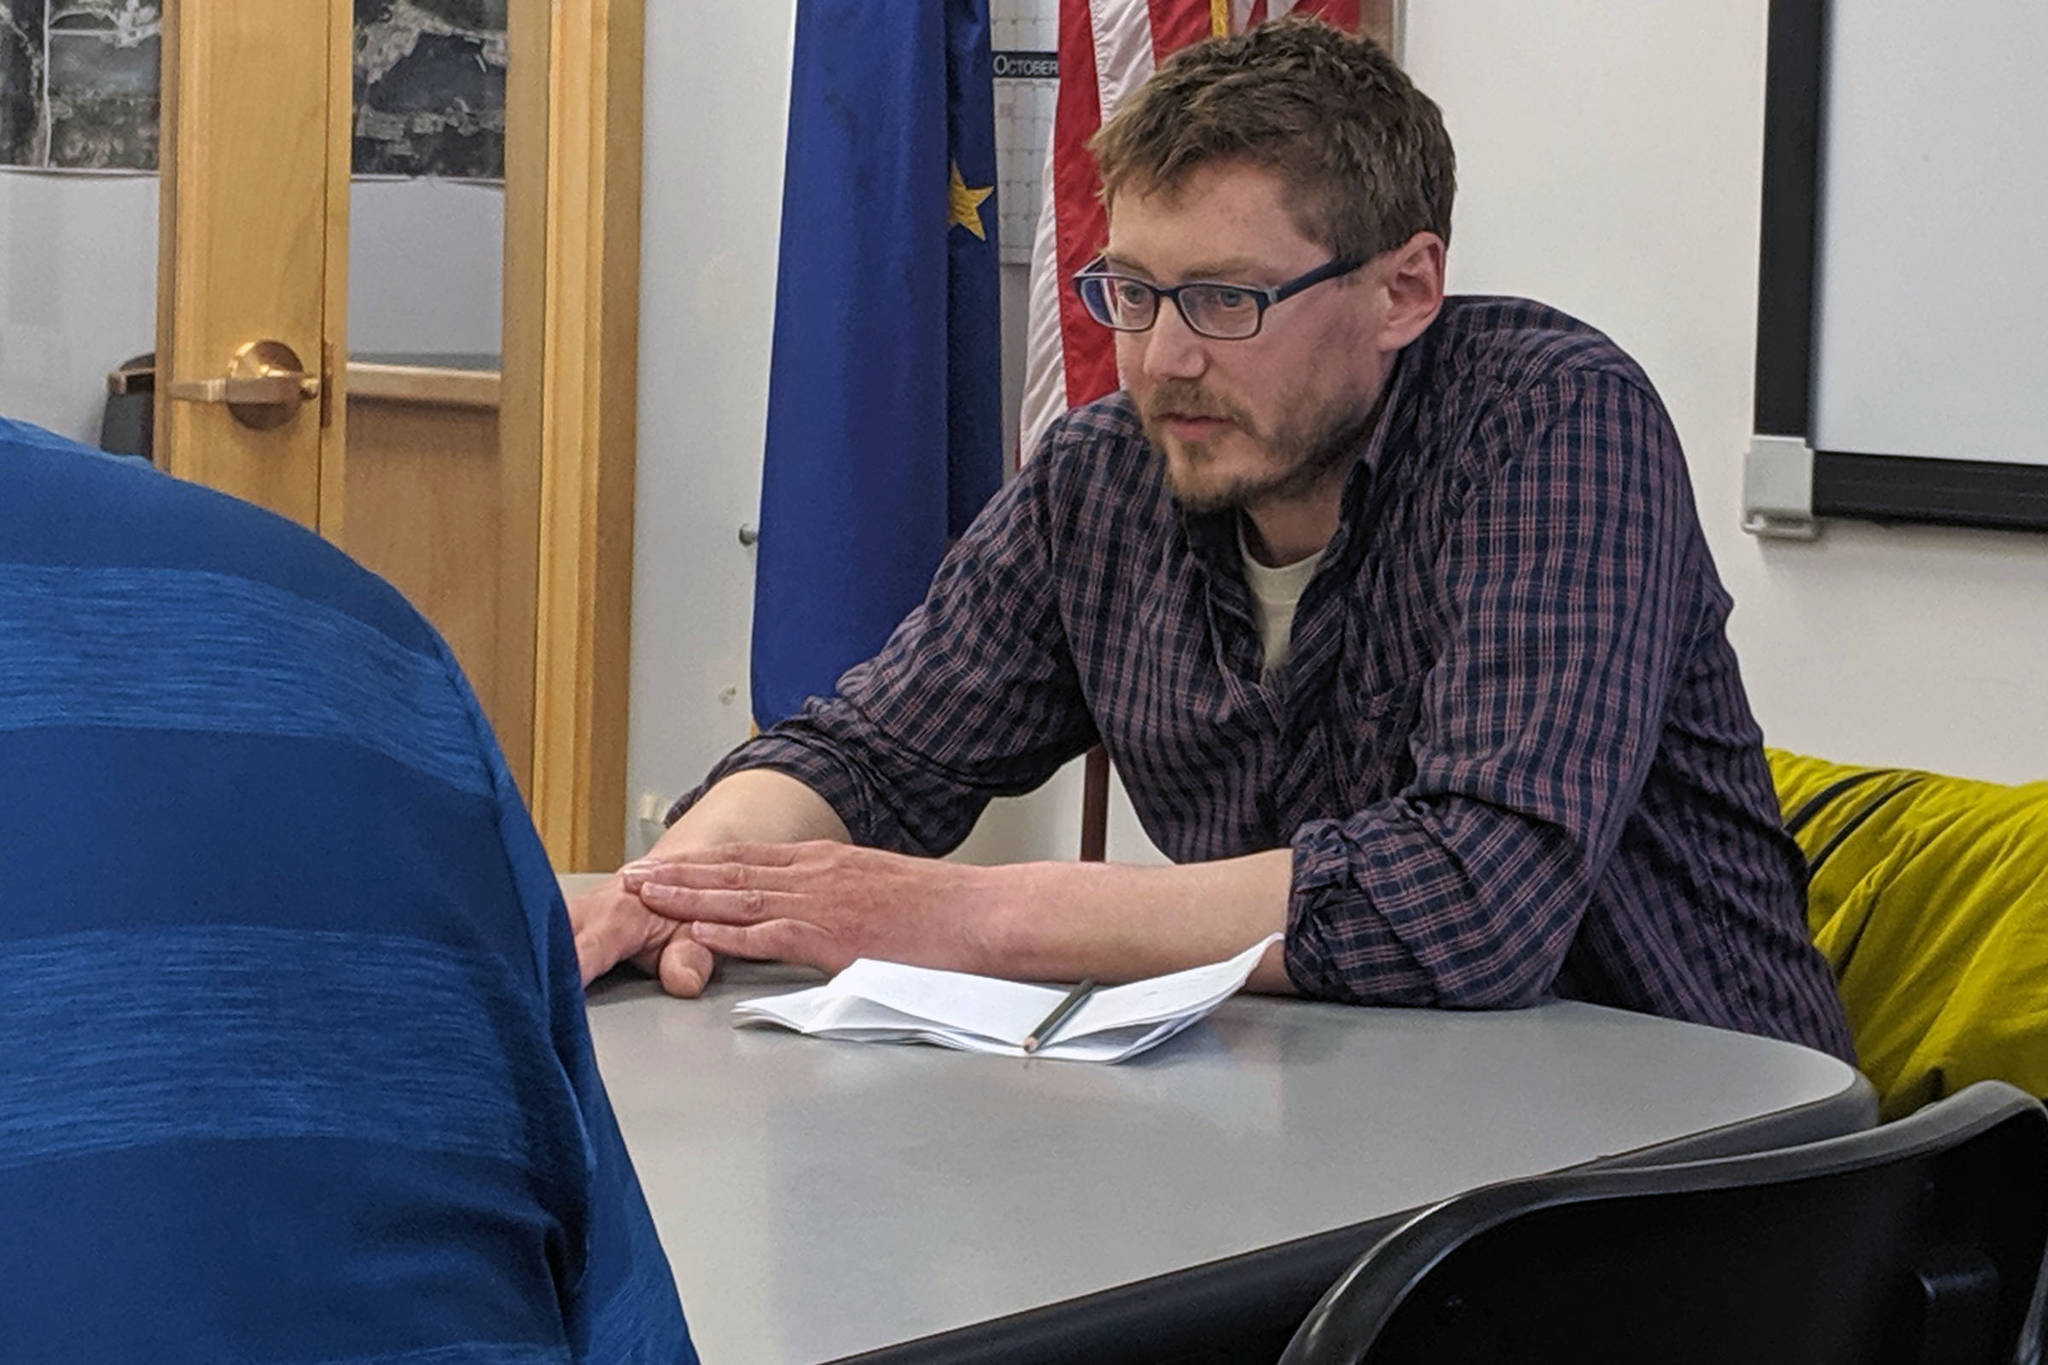 Shawn Eisele is the lone newcomer to the Eaglecrest board after a series of interviews and meetings Wednesday night. Eisele joins two other reappoints in filling three openings. (Ben Hohenstatt | Juneau Empire)